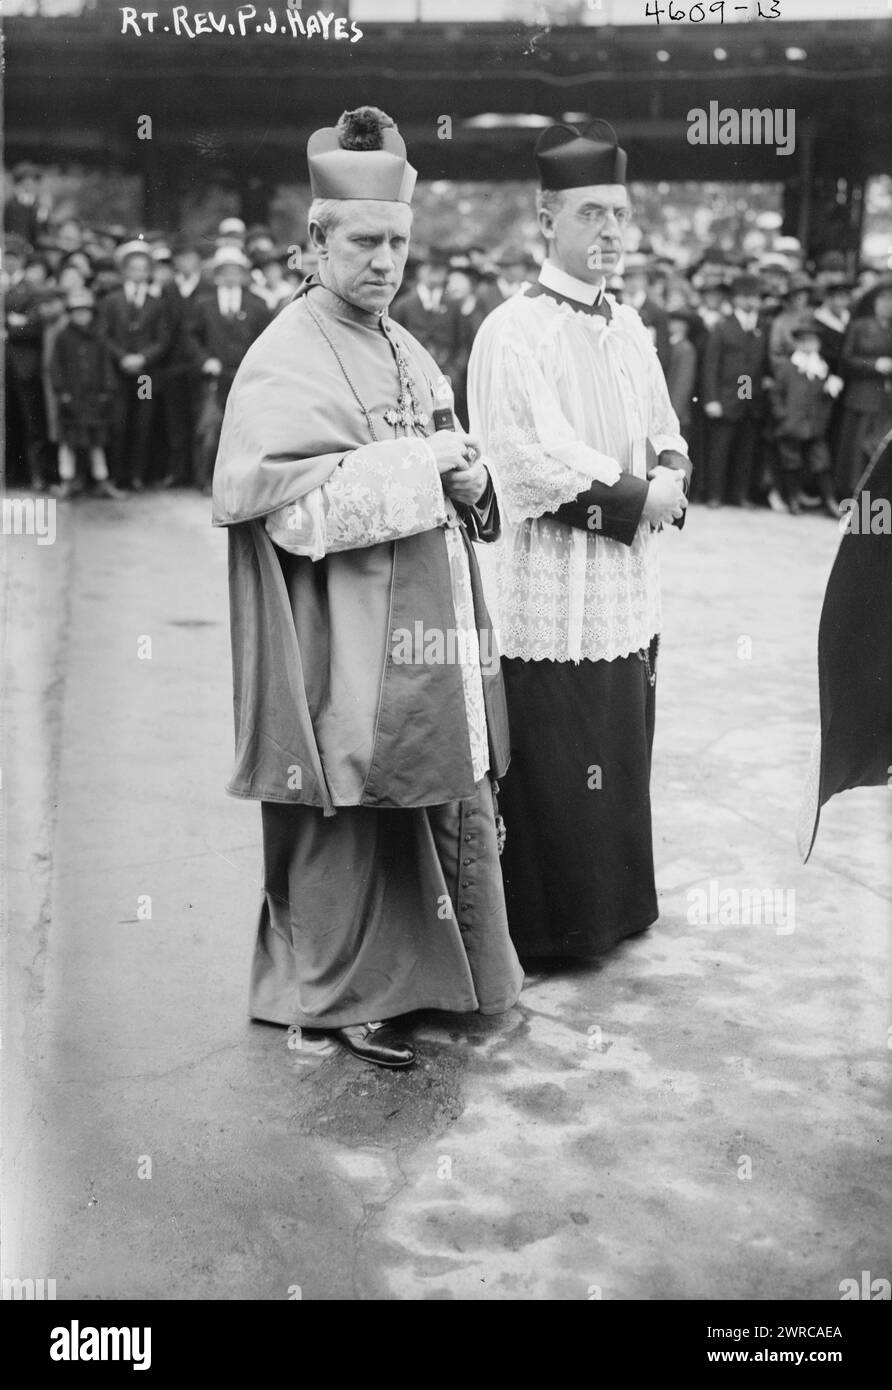 Rt. Rev. P.J. Hayes, Photograph shows Patrick Joseph Hayes (1867-1938), American Cardinal of the Roman Catholic Church who was Vicar Apostolic of Military, USA. He is attending the military mass at the Battery, New York City, May 1918 during World War I., 1918 May 30, Glass negatives, 1 negative: glass Stock Photo